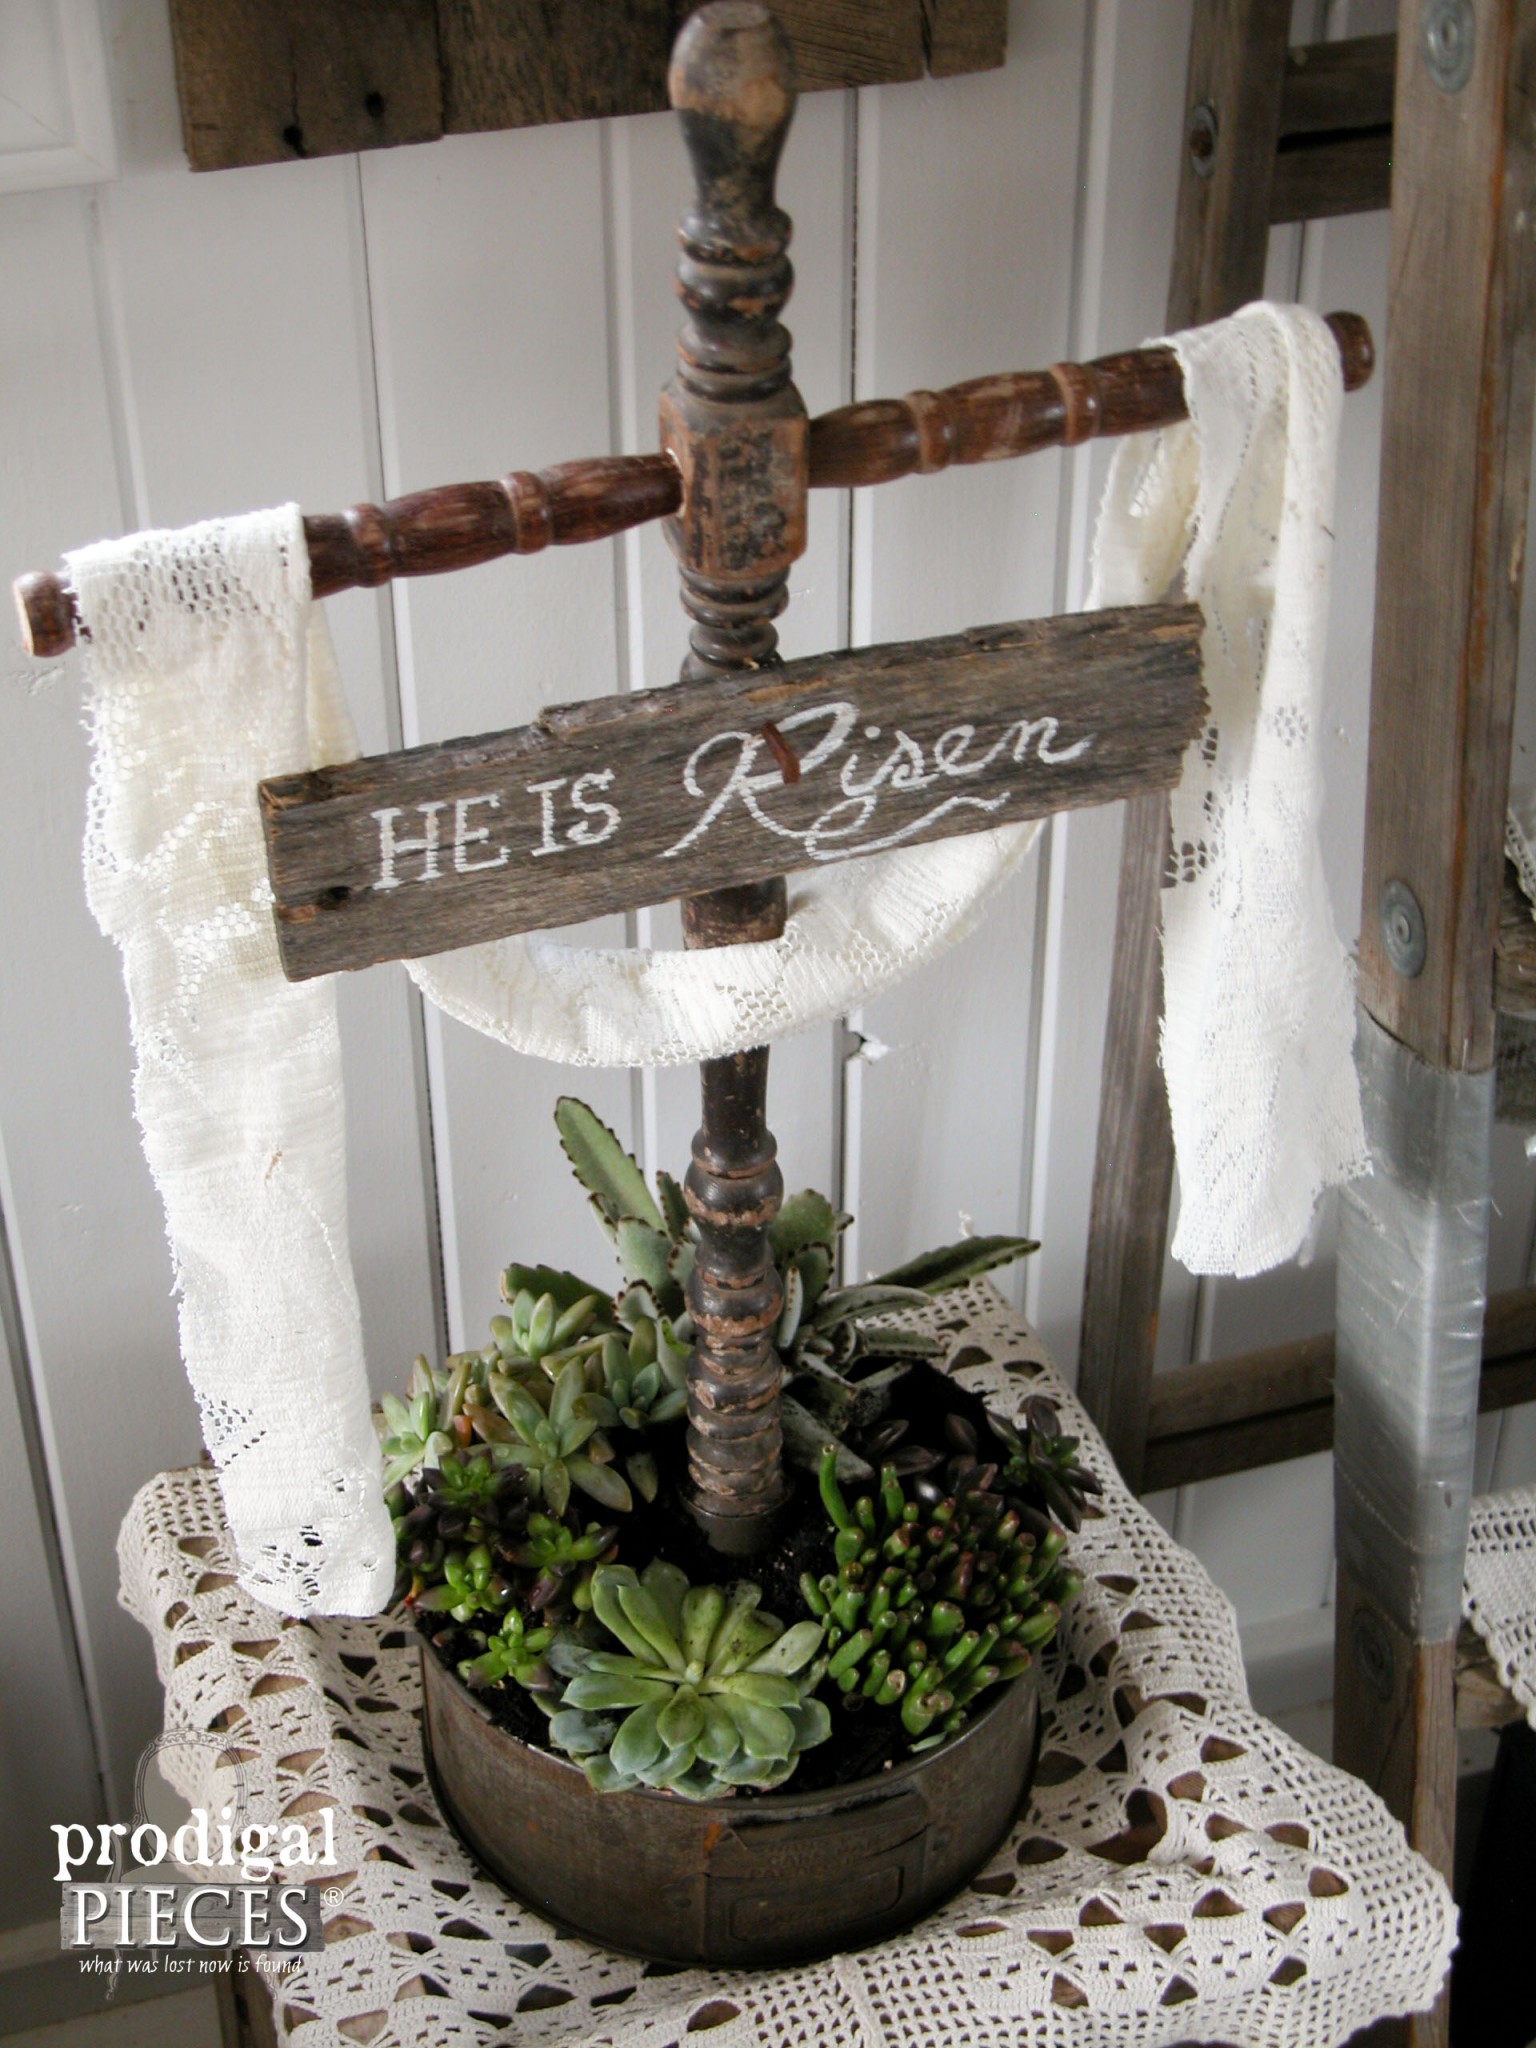 Reclaimed Vintage Finds Become Easter Cross Succulent Planter by Prodigal Pieces | www.prodigalpieces.com